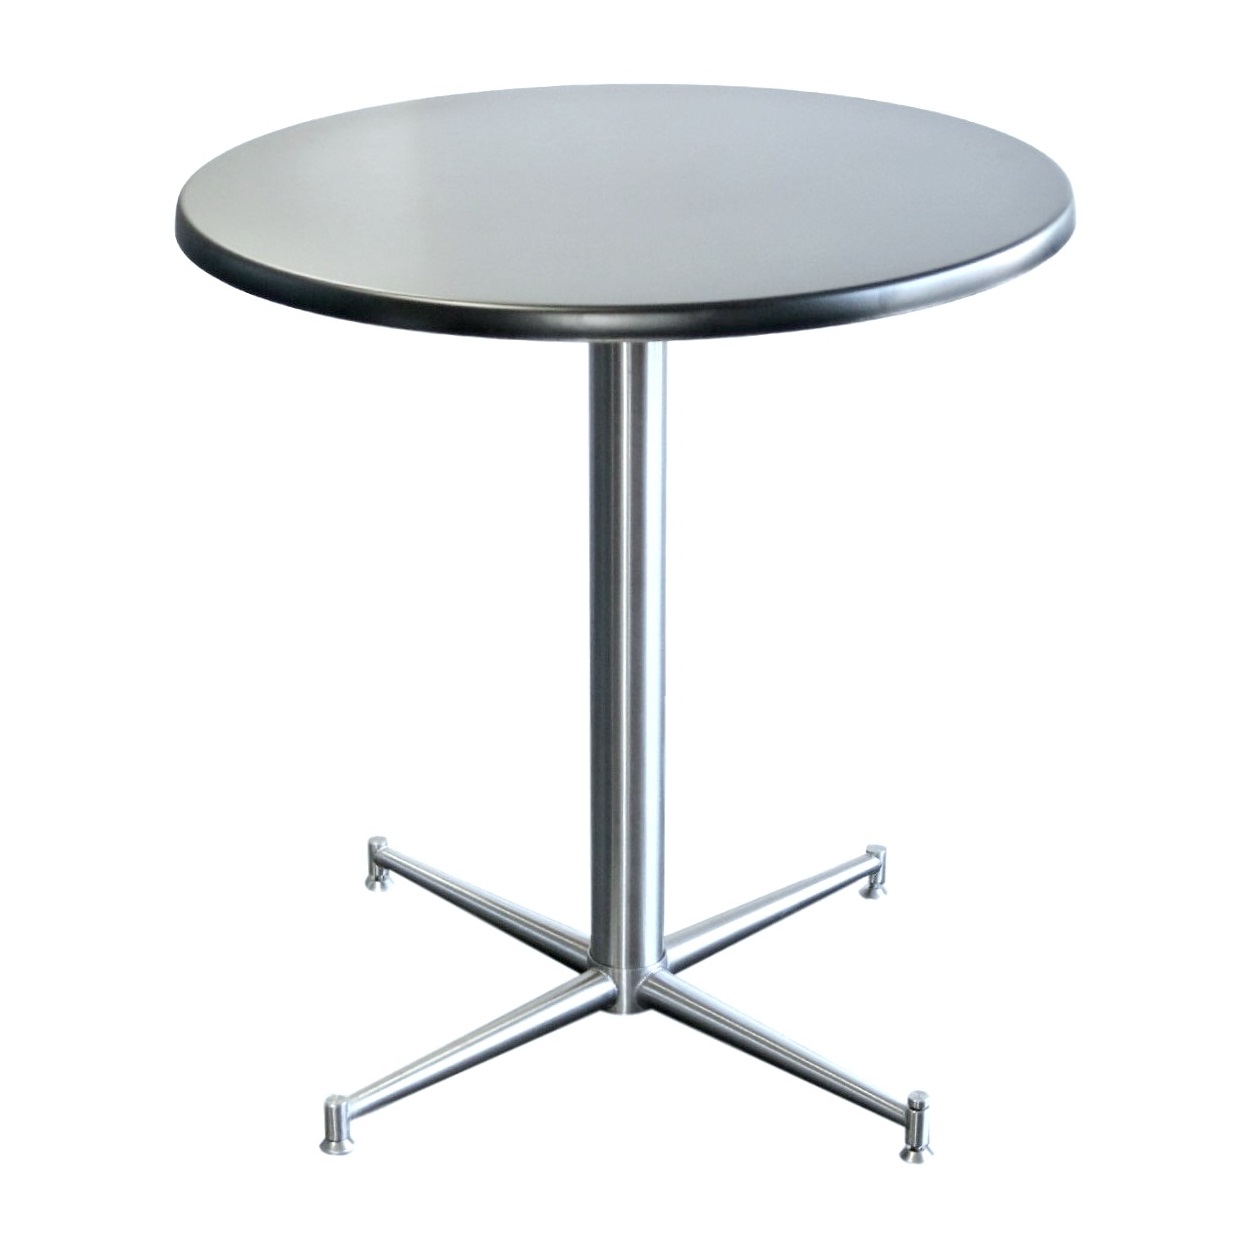 Stirling Table Base Round Table